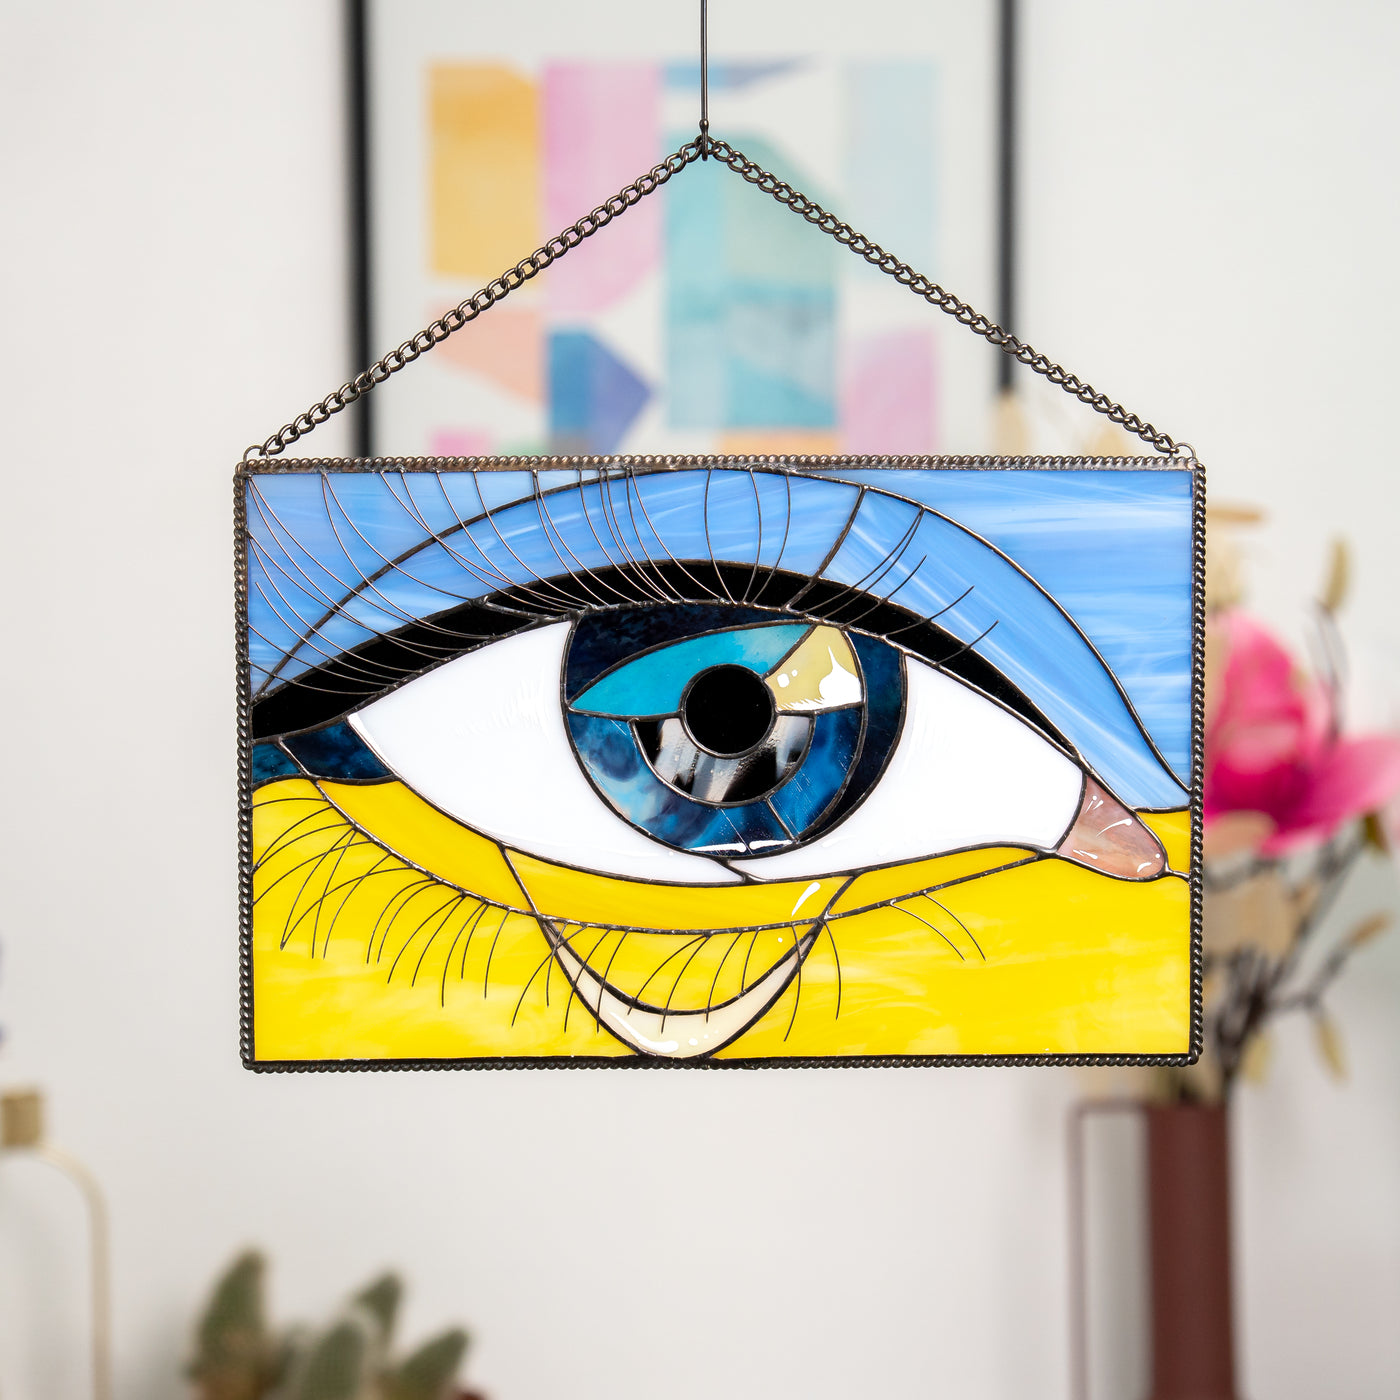 Stained glass Ukrainian flag with the eye in the middle window hanging